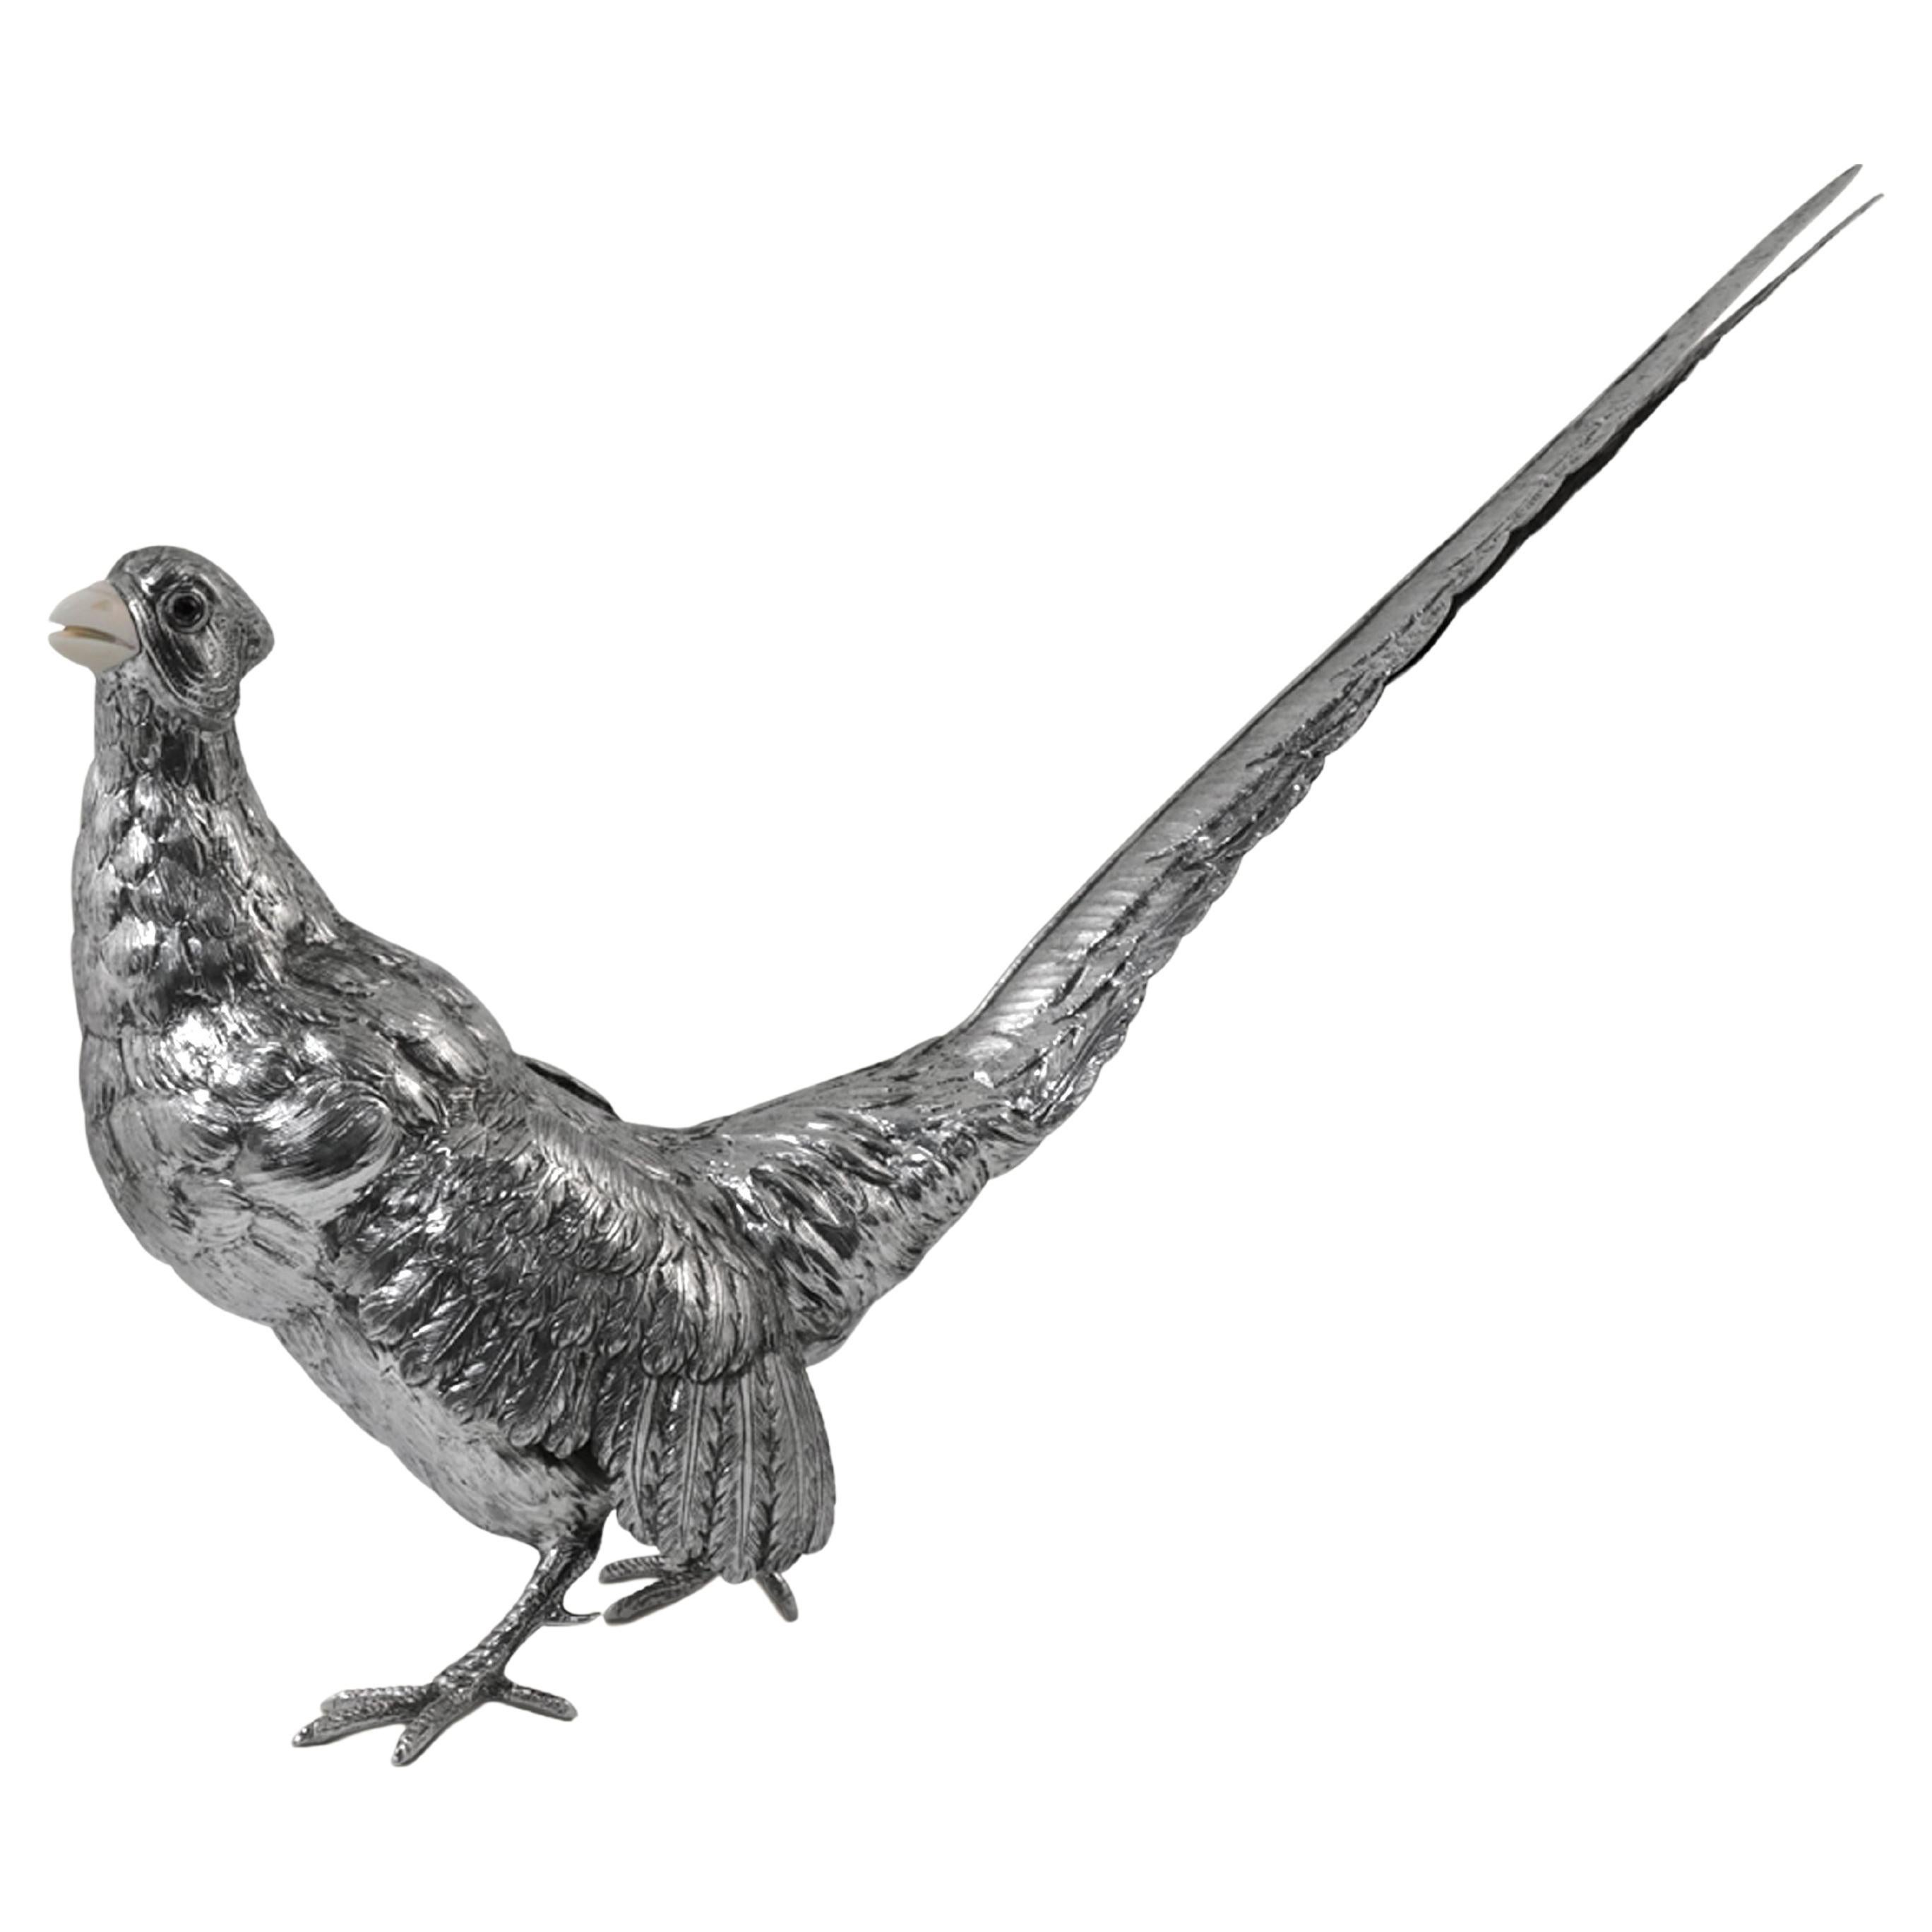 Pheasant by Alcino Silversmith 1902 in Sterling Silver 925 with Bone Beak For Sale